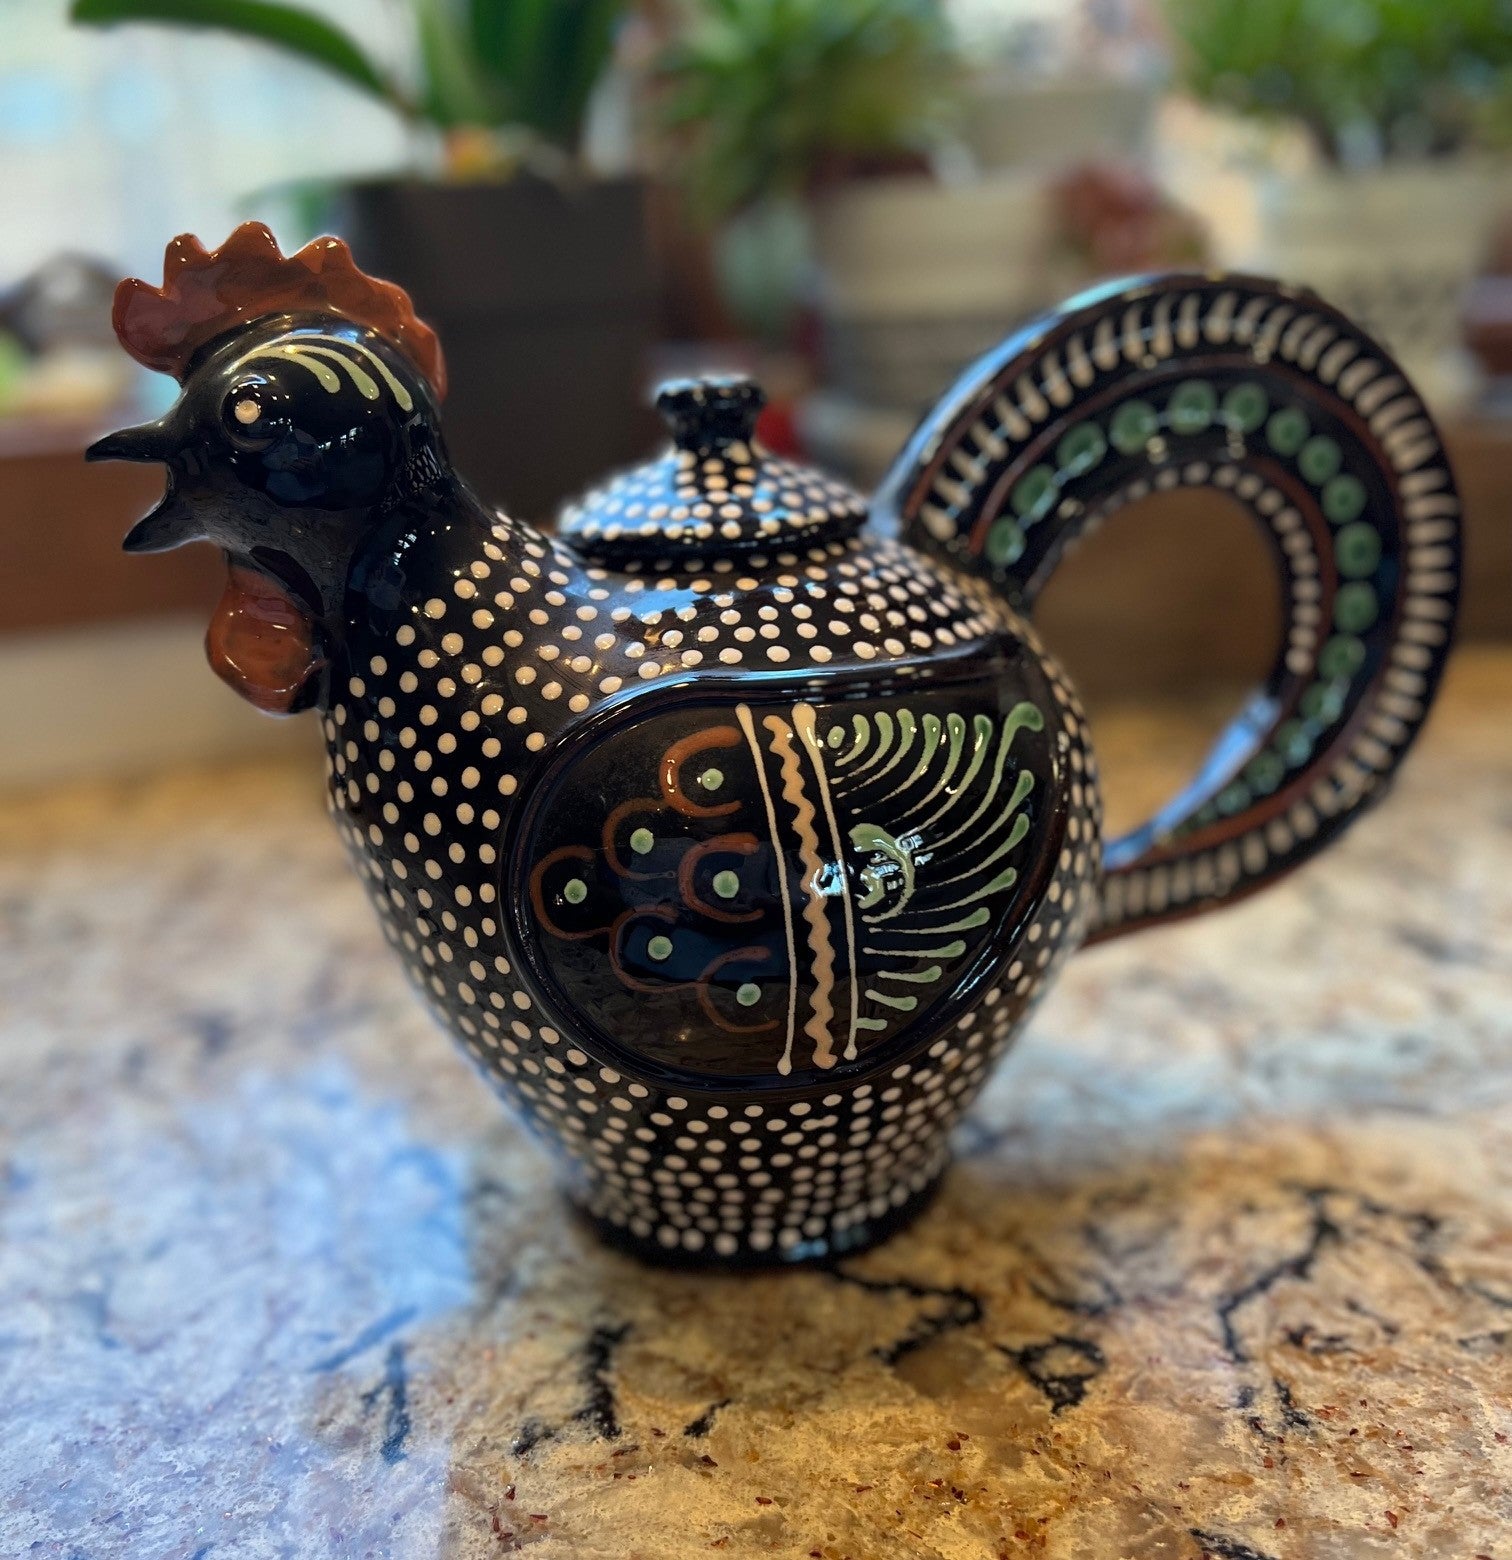 A Hungarian Folk Art Red Ware Rooster Lidded Jug/Teapot by Imre Szűcs. A black/brown based rooster decorated with white dots and green, yellow and red painted elements.  The spout is in the beak. The inside of the teapot is glazed red ware. The